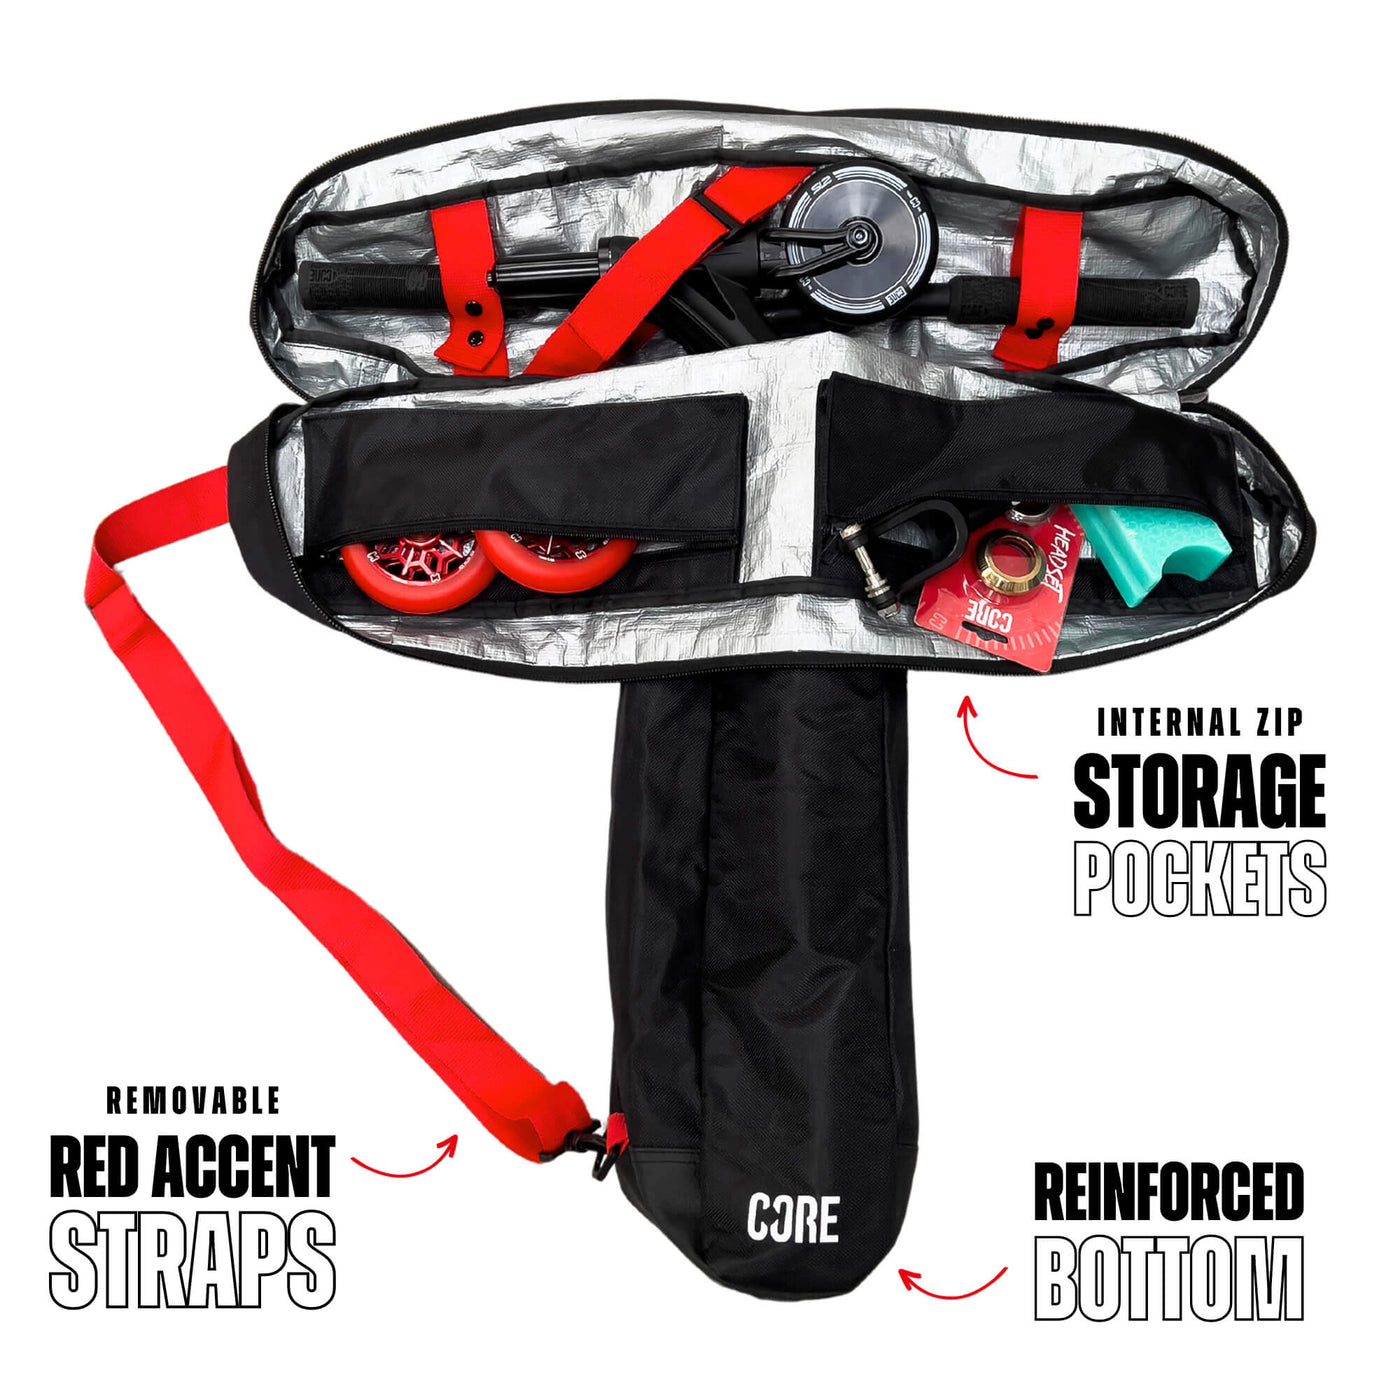 CORE Scooter Travel Bag how to take your Stunt Scooter on a Plane